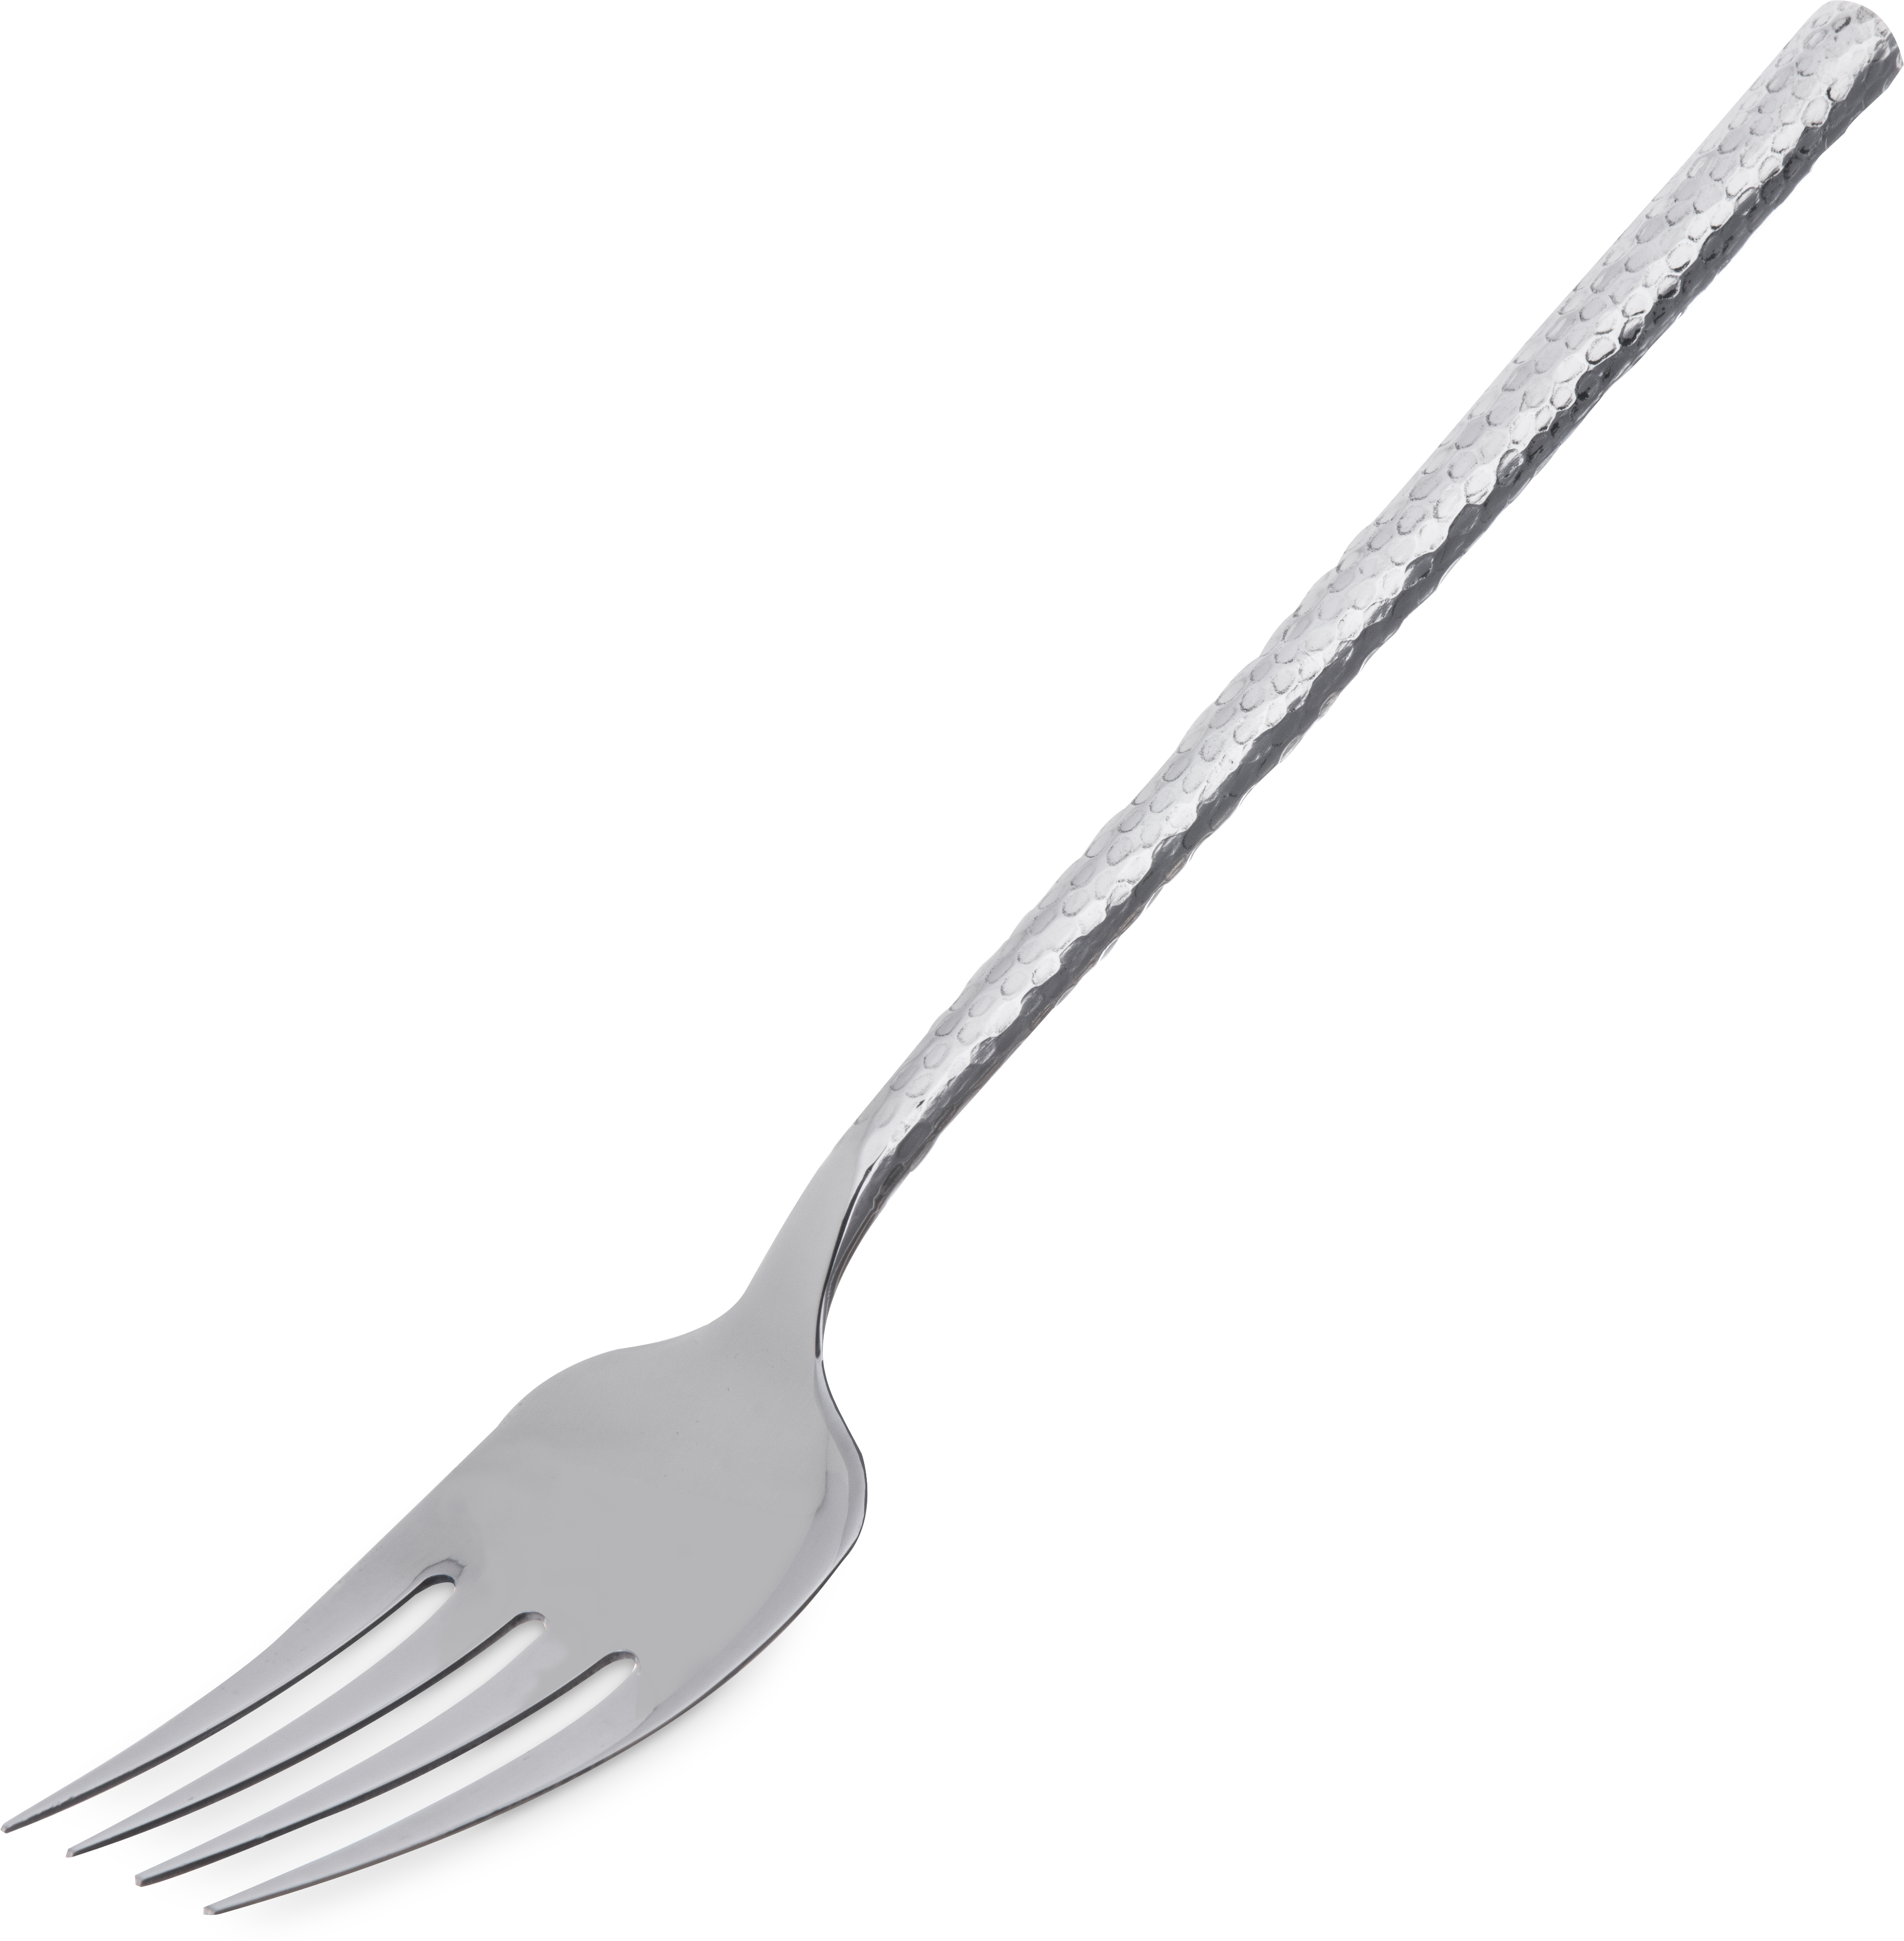 Terra Cold Meat Fork 12 - Hammered Mirror Finish - Stainless Steel